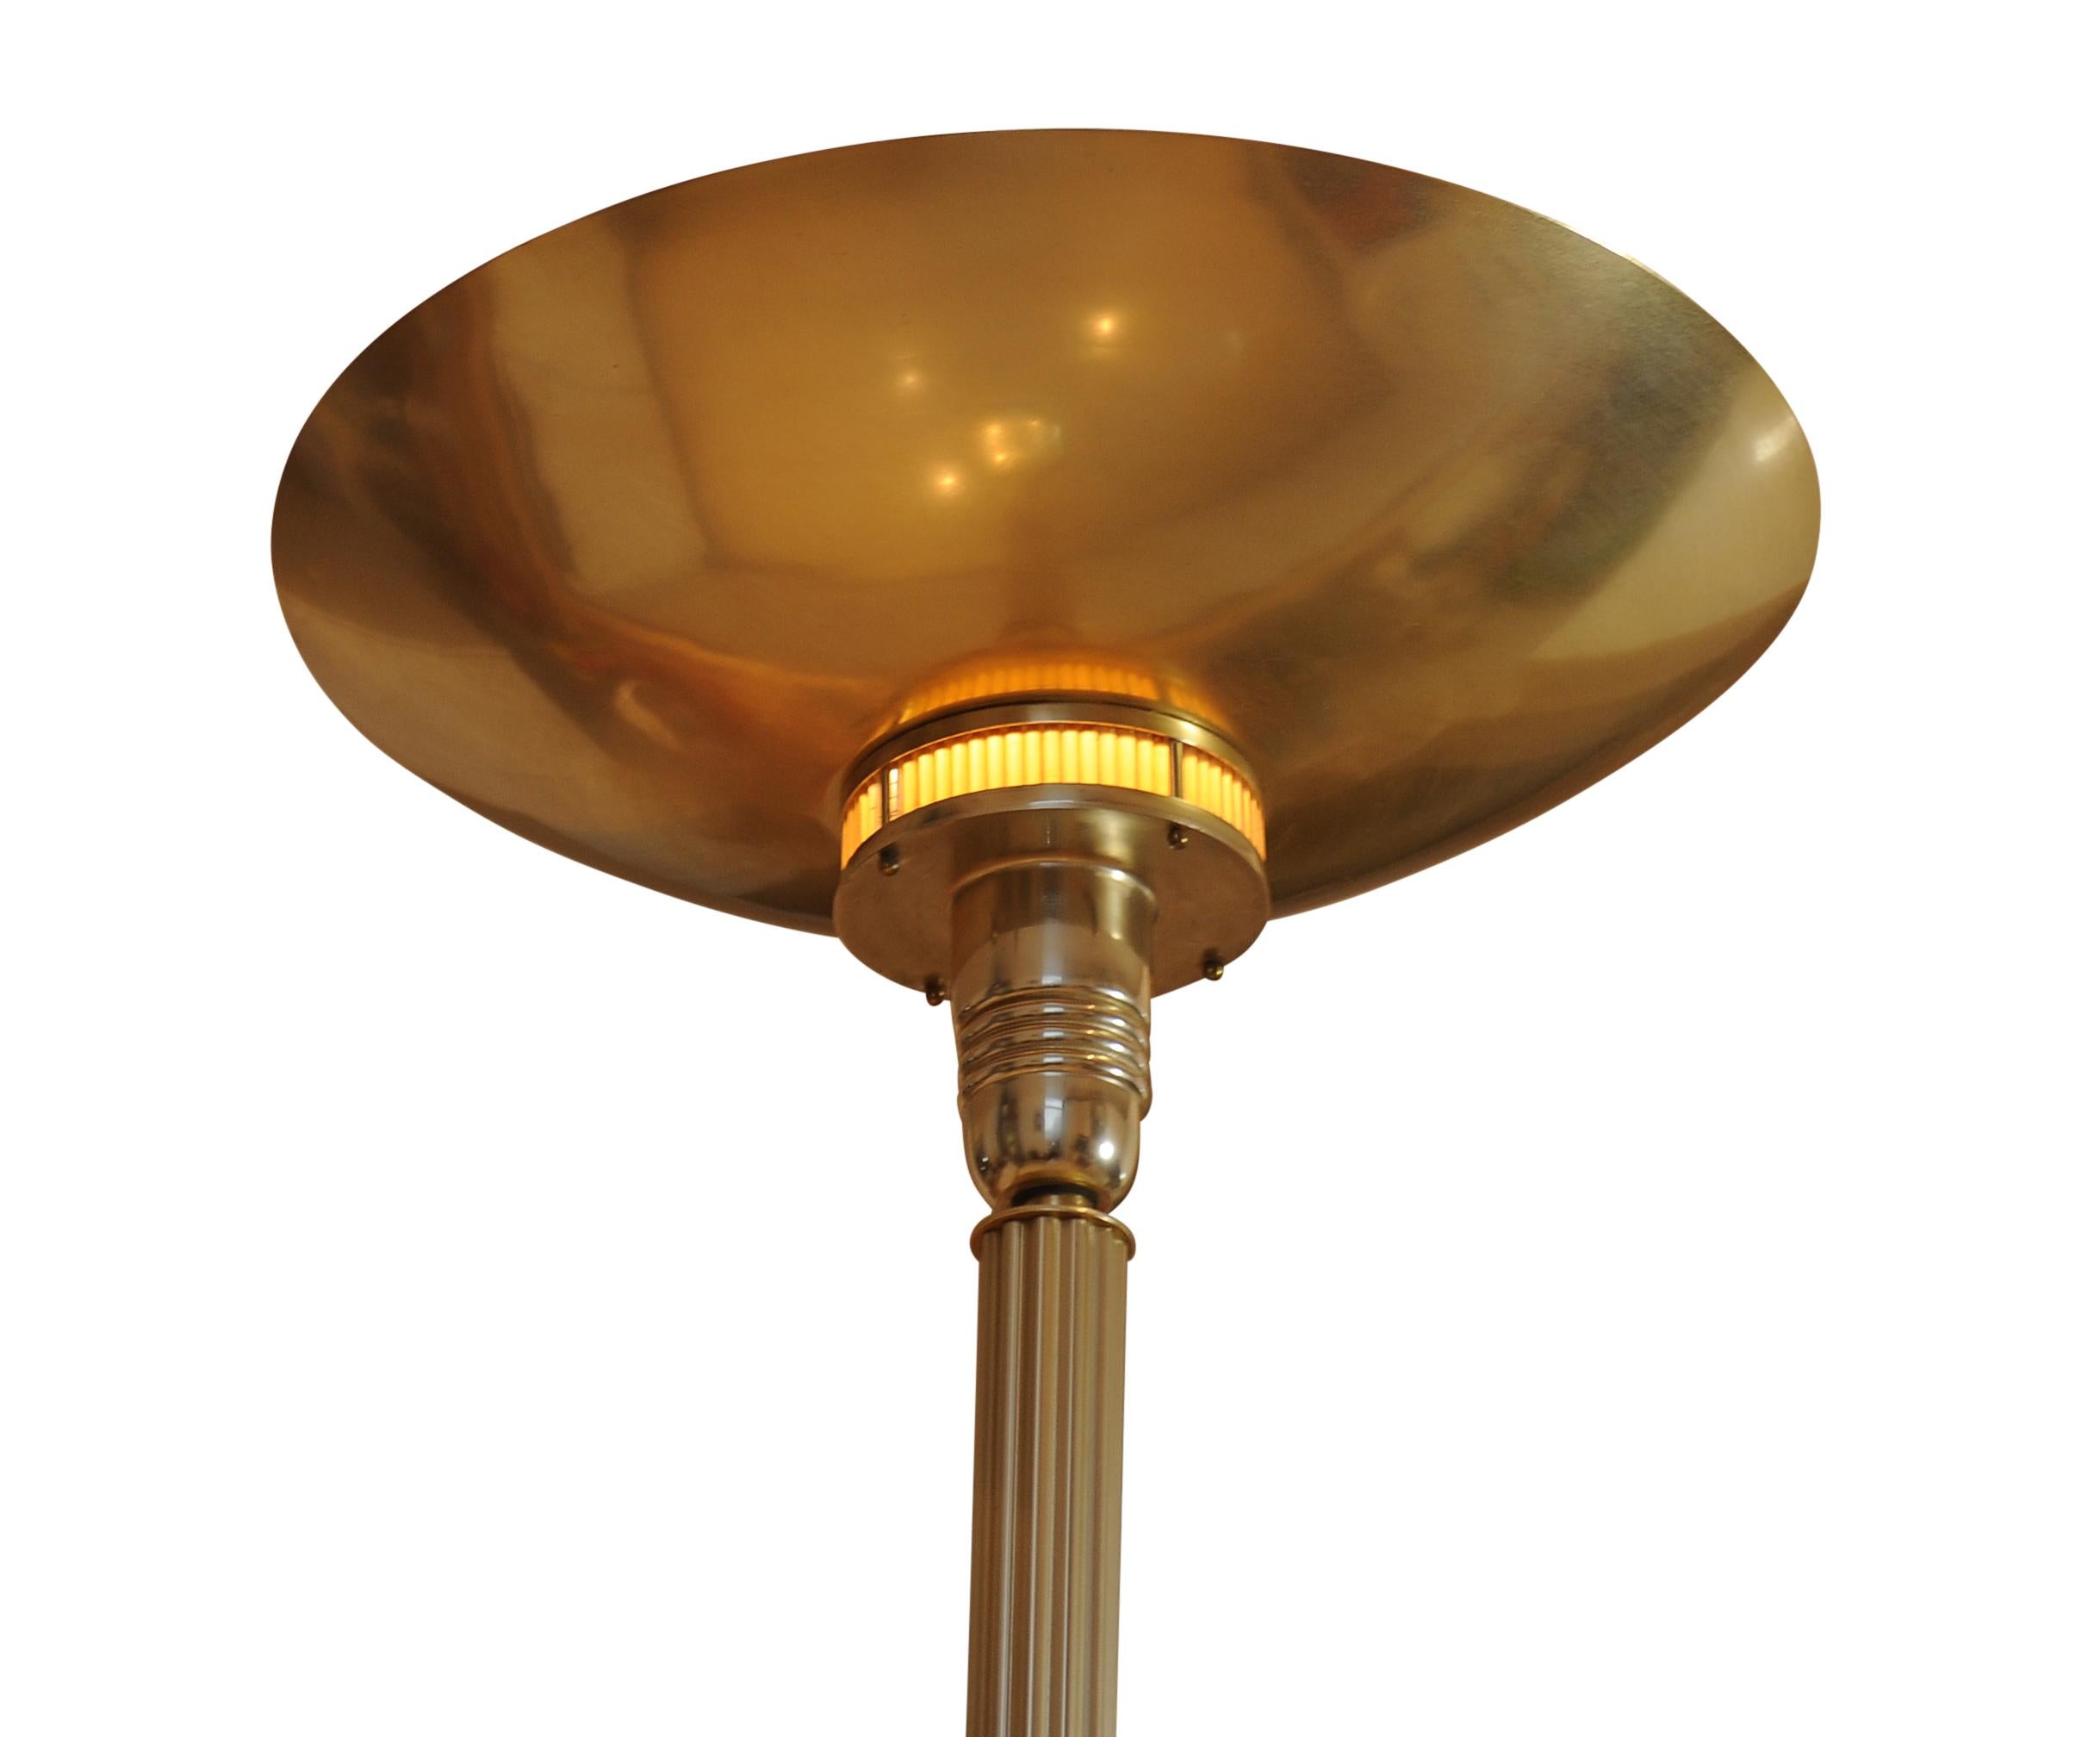 1920's Art Deco Original Statuesque Aluminium Floor Lamp with Amber Glass Trim In Good Condition For Sale In High Wycombe, GB